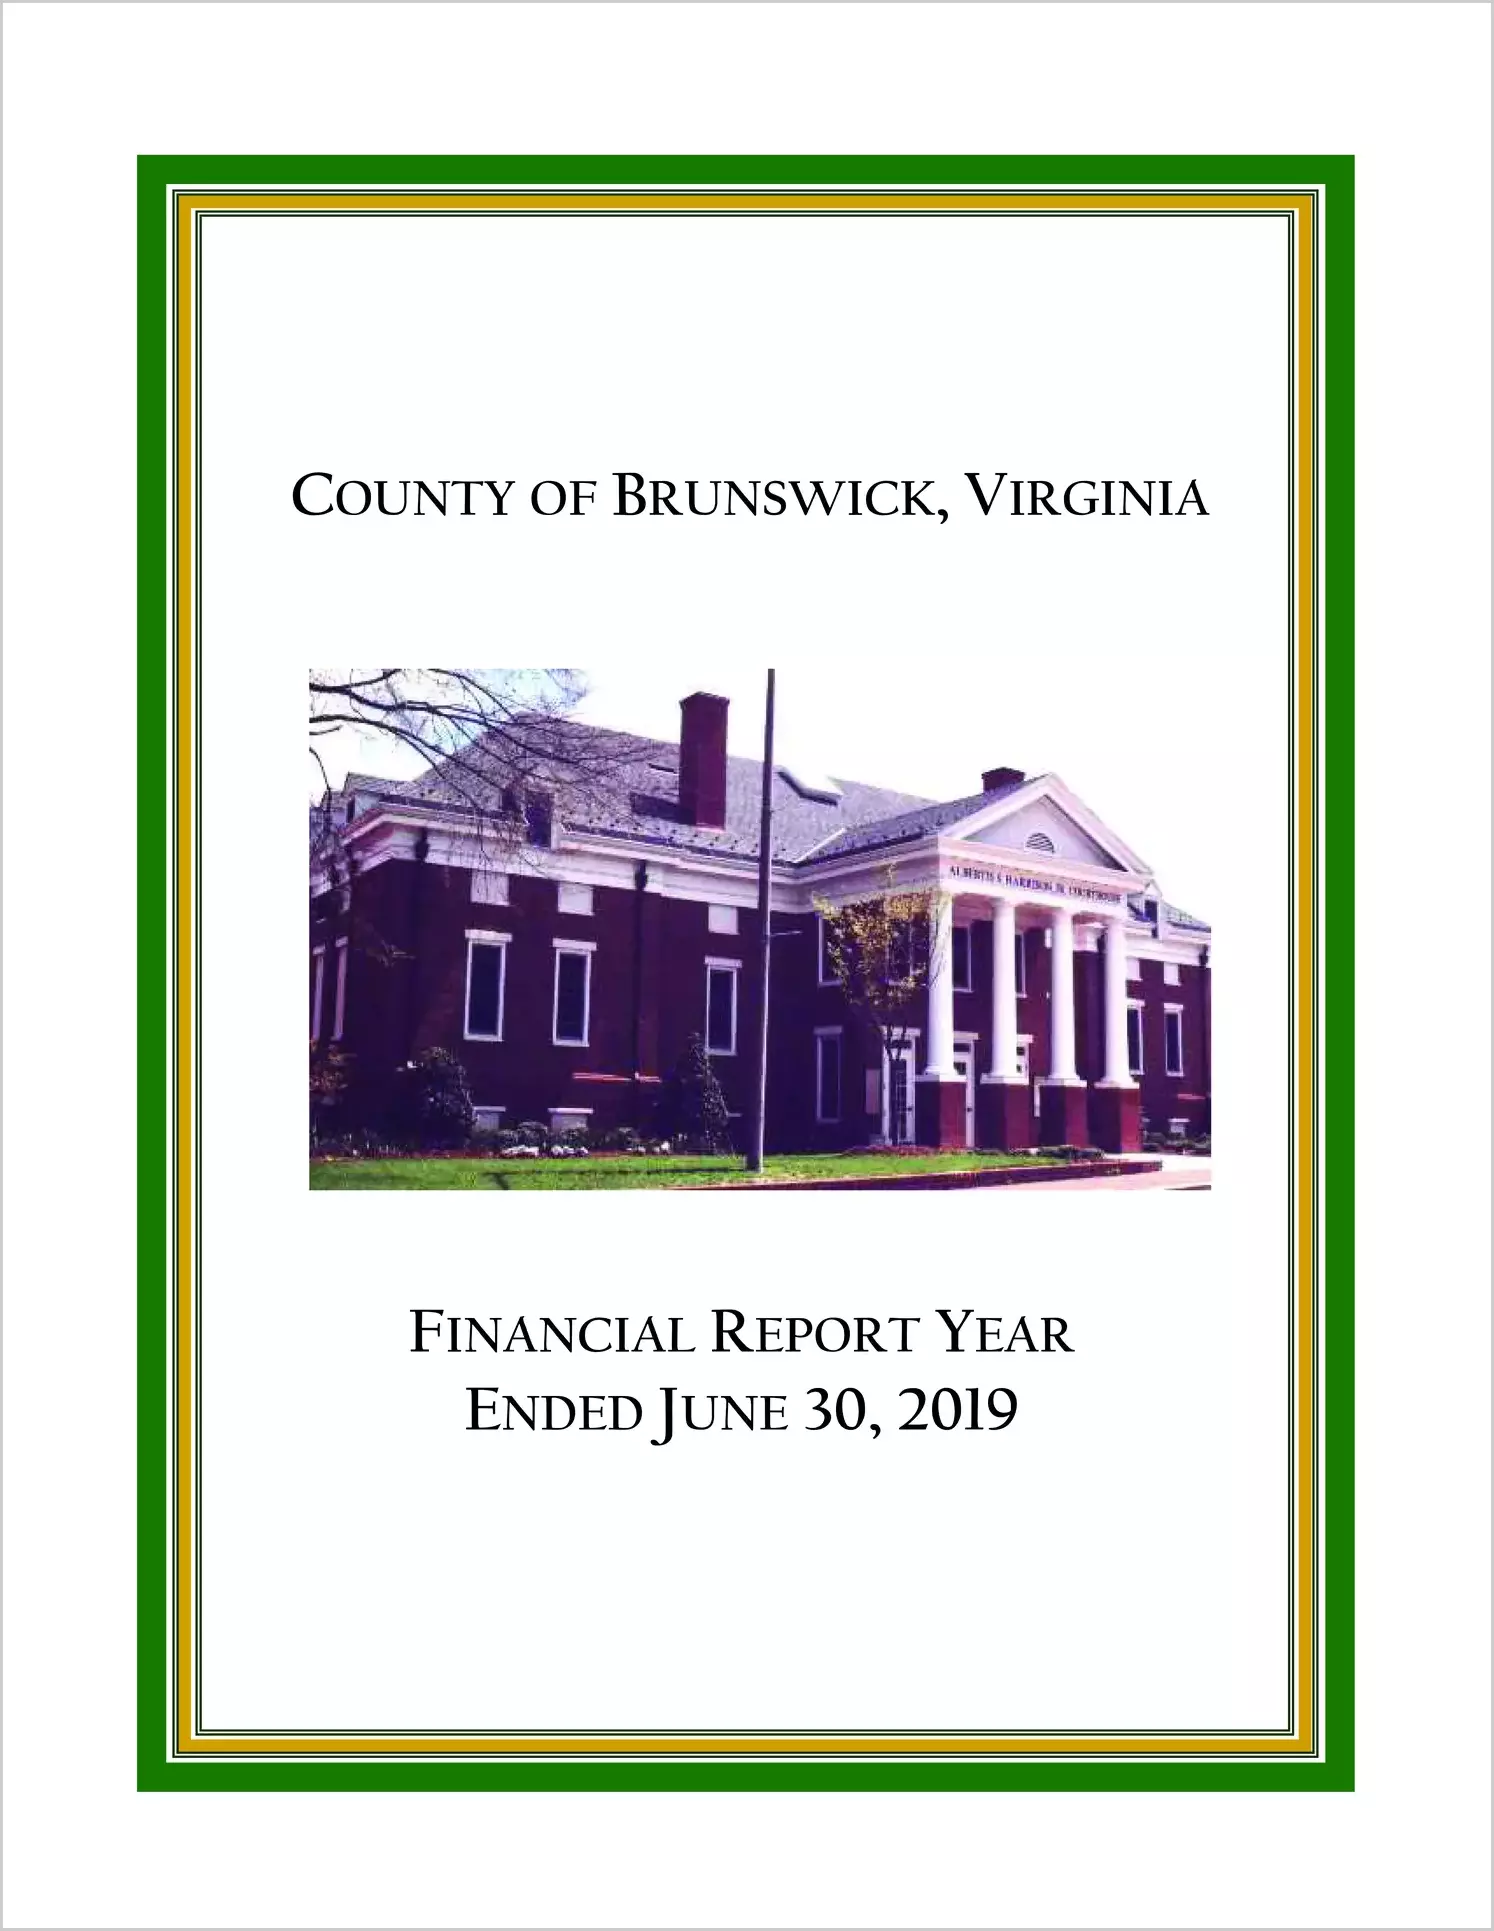 2019 Annual Financial Report for County of Brunswick